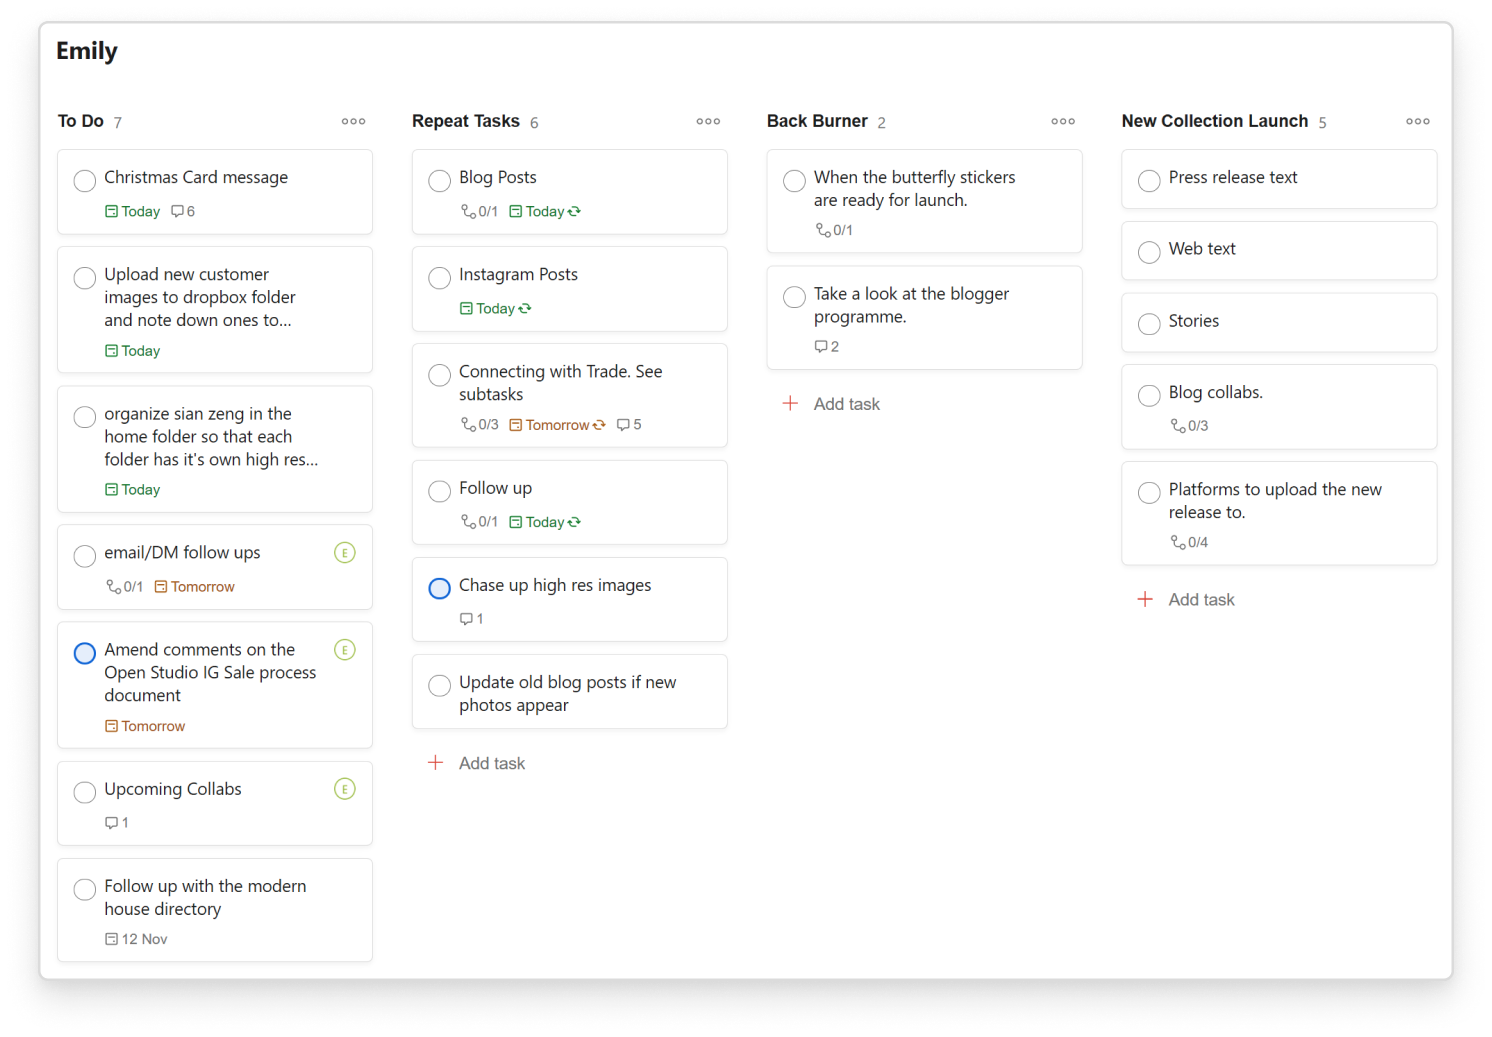 sian zeng user story todoist shared project